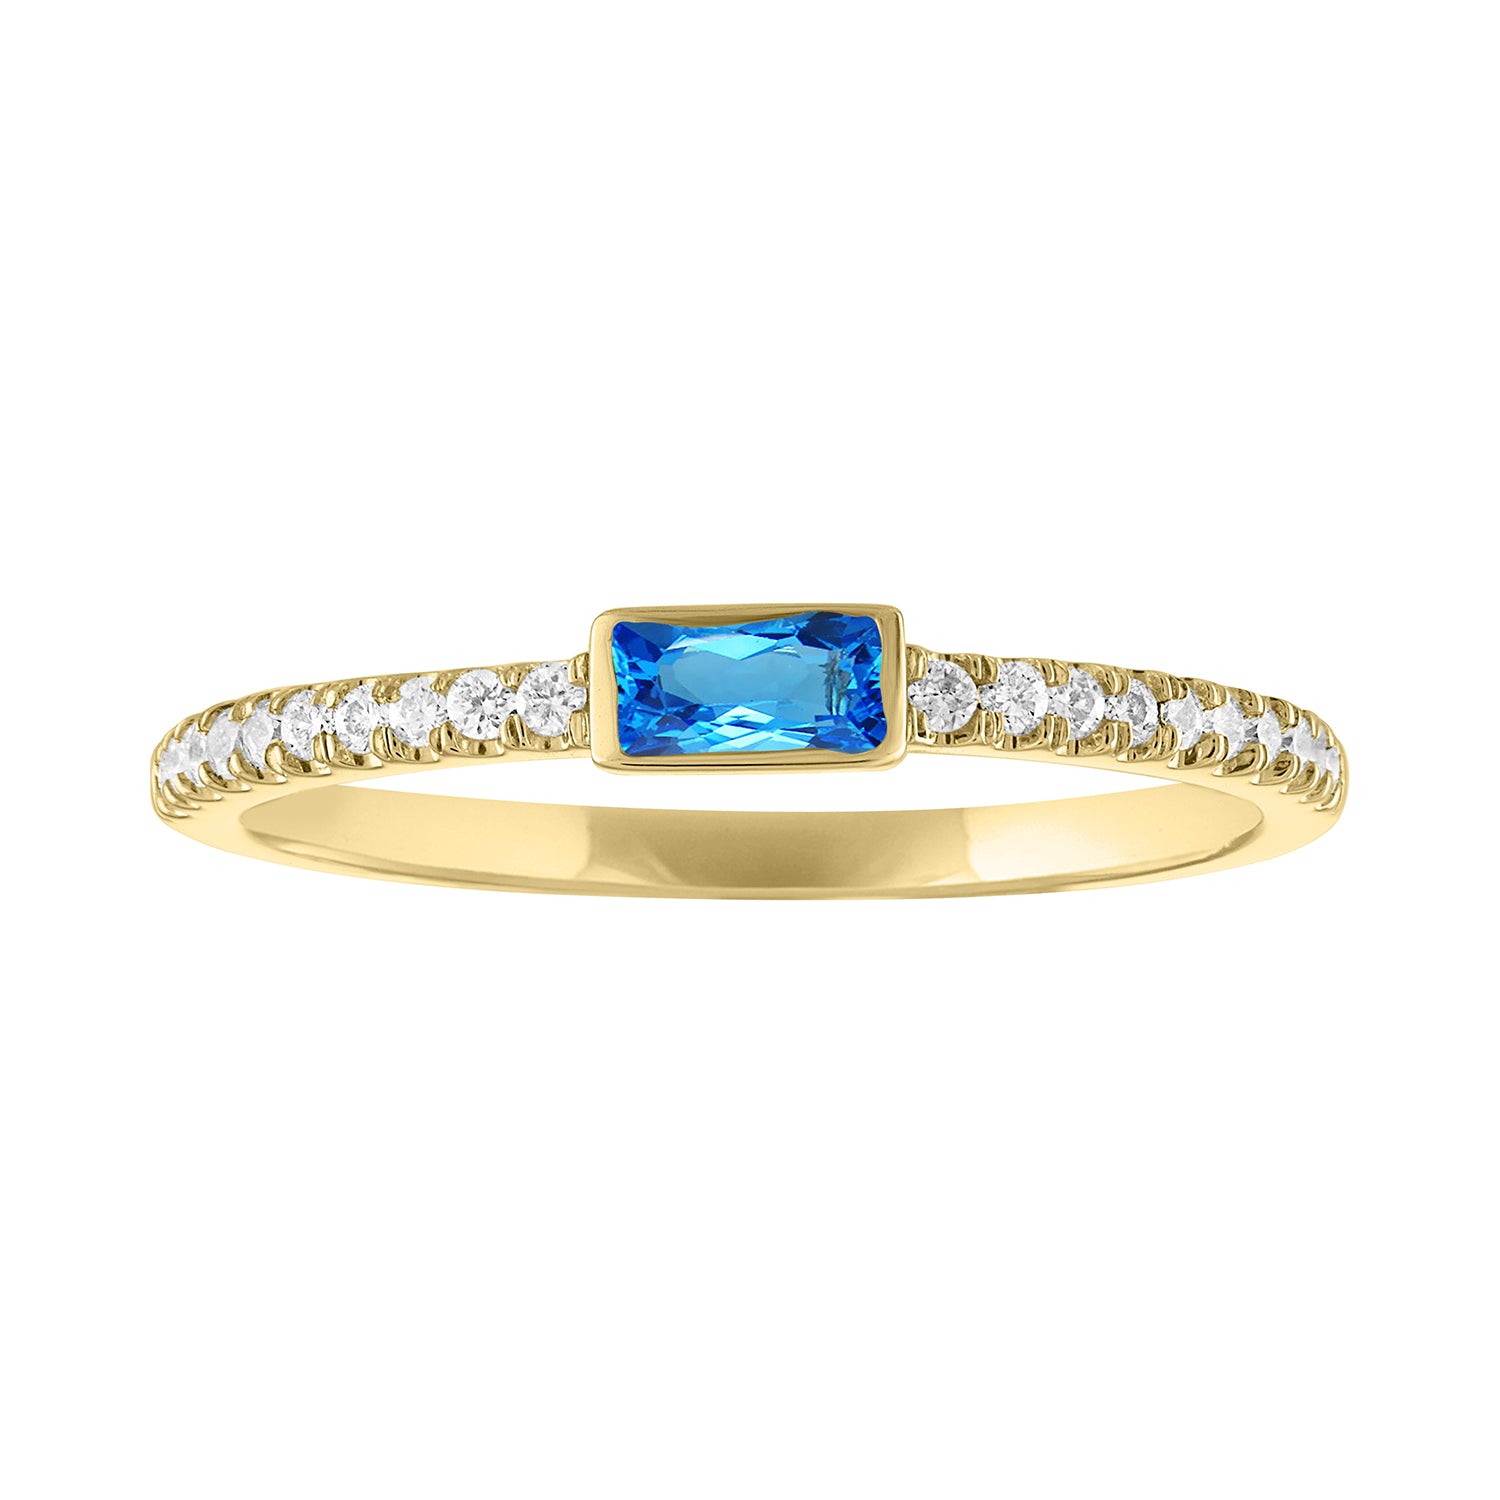 Yellow gold skinny band with a bezeled blue topaz baguette in the center and round diamonds on the shank. 